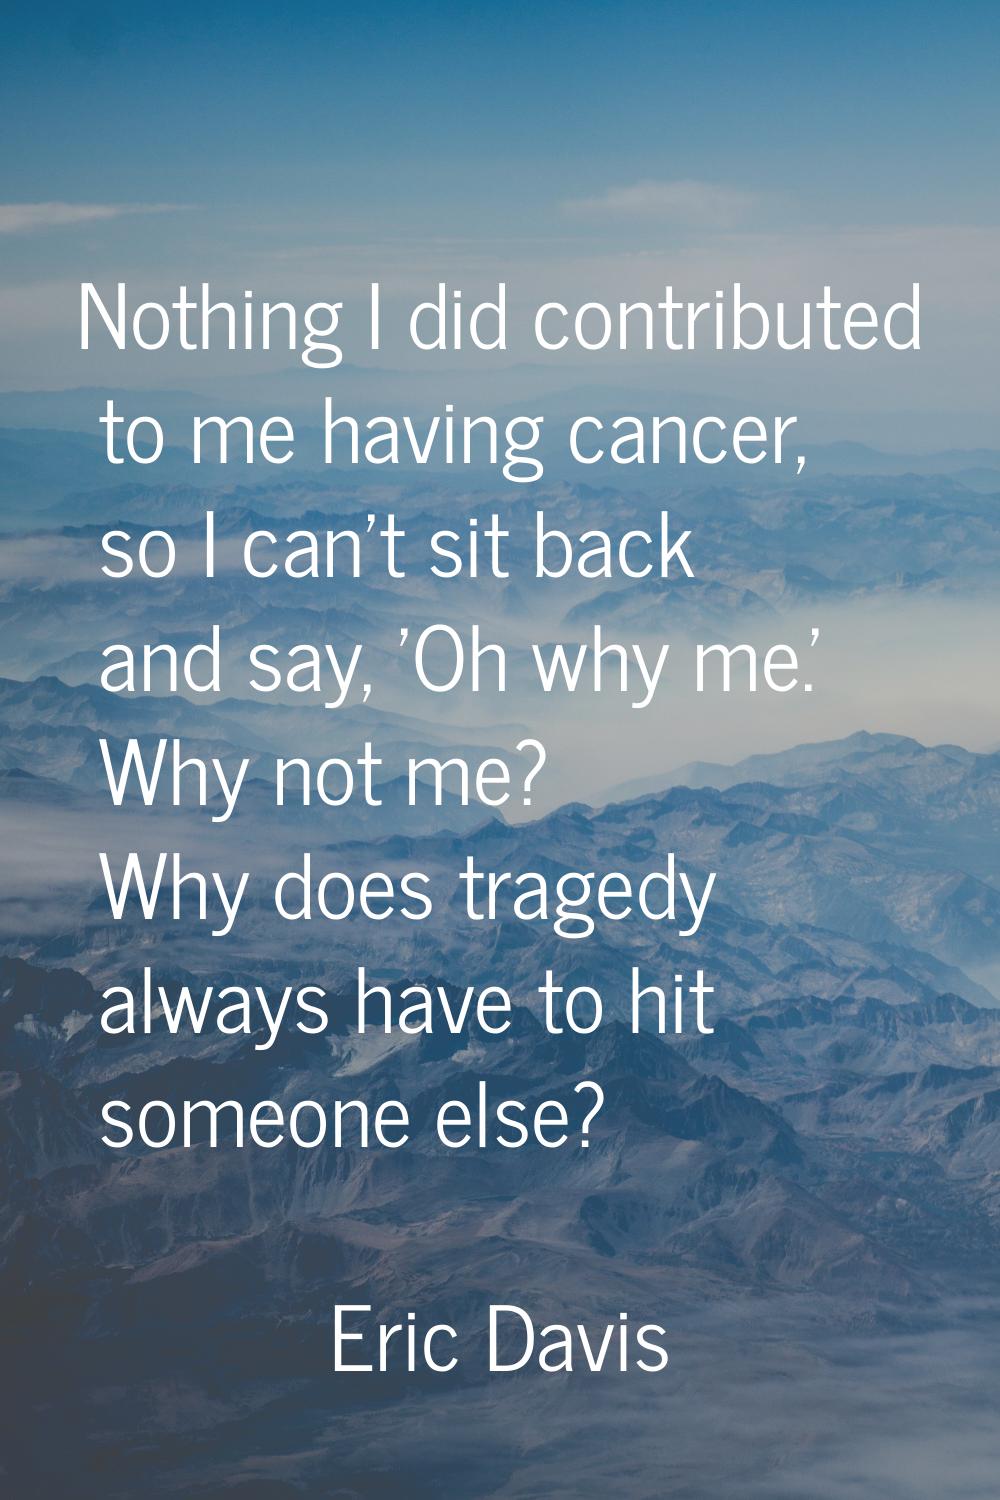 Nothing I did contributed to me having cancer, so I can't sit back and say, 'Oh why me.' Why not me